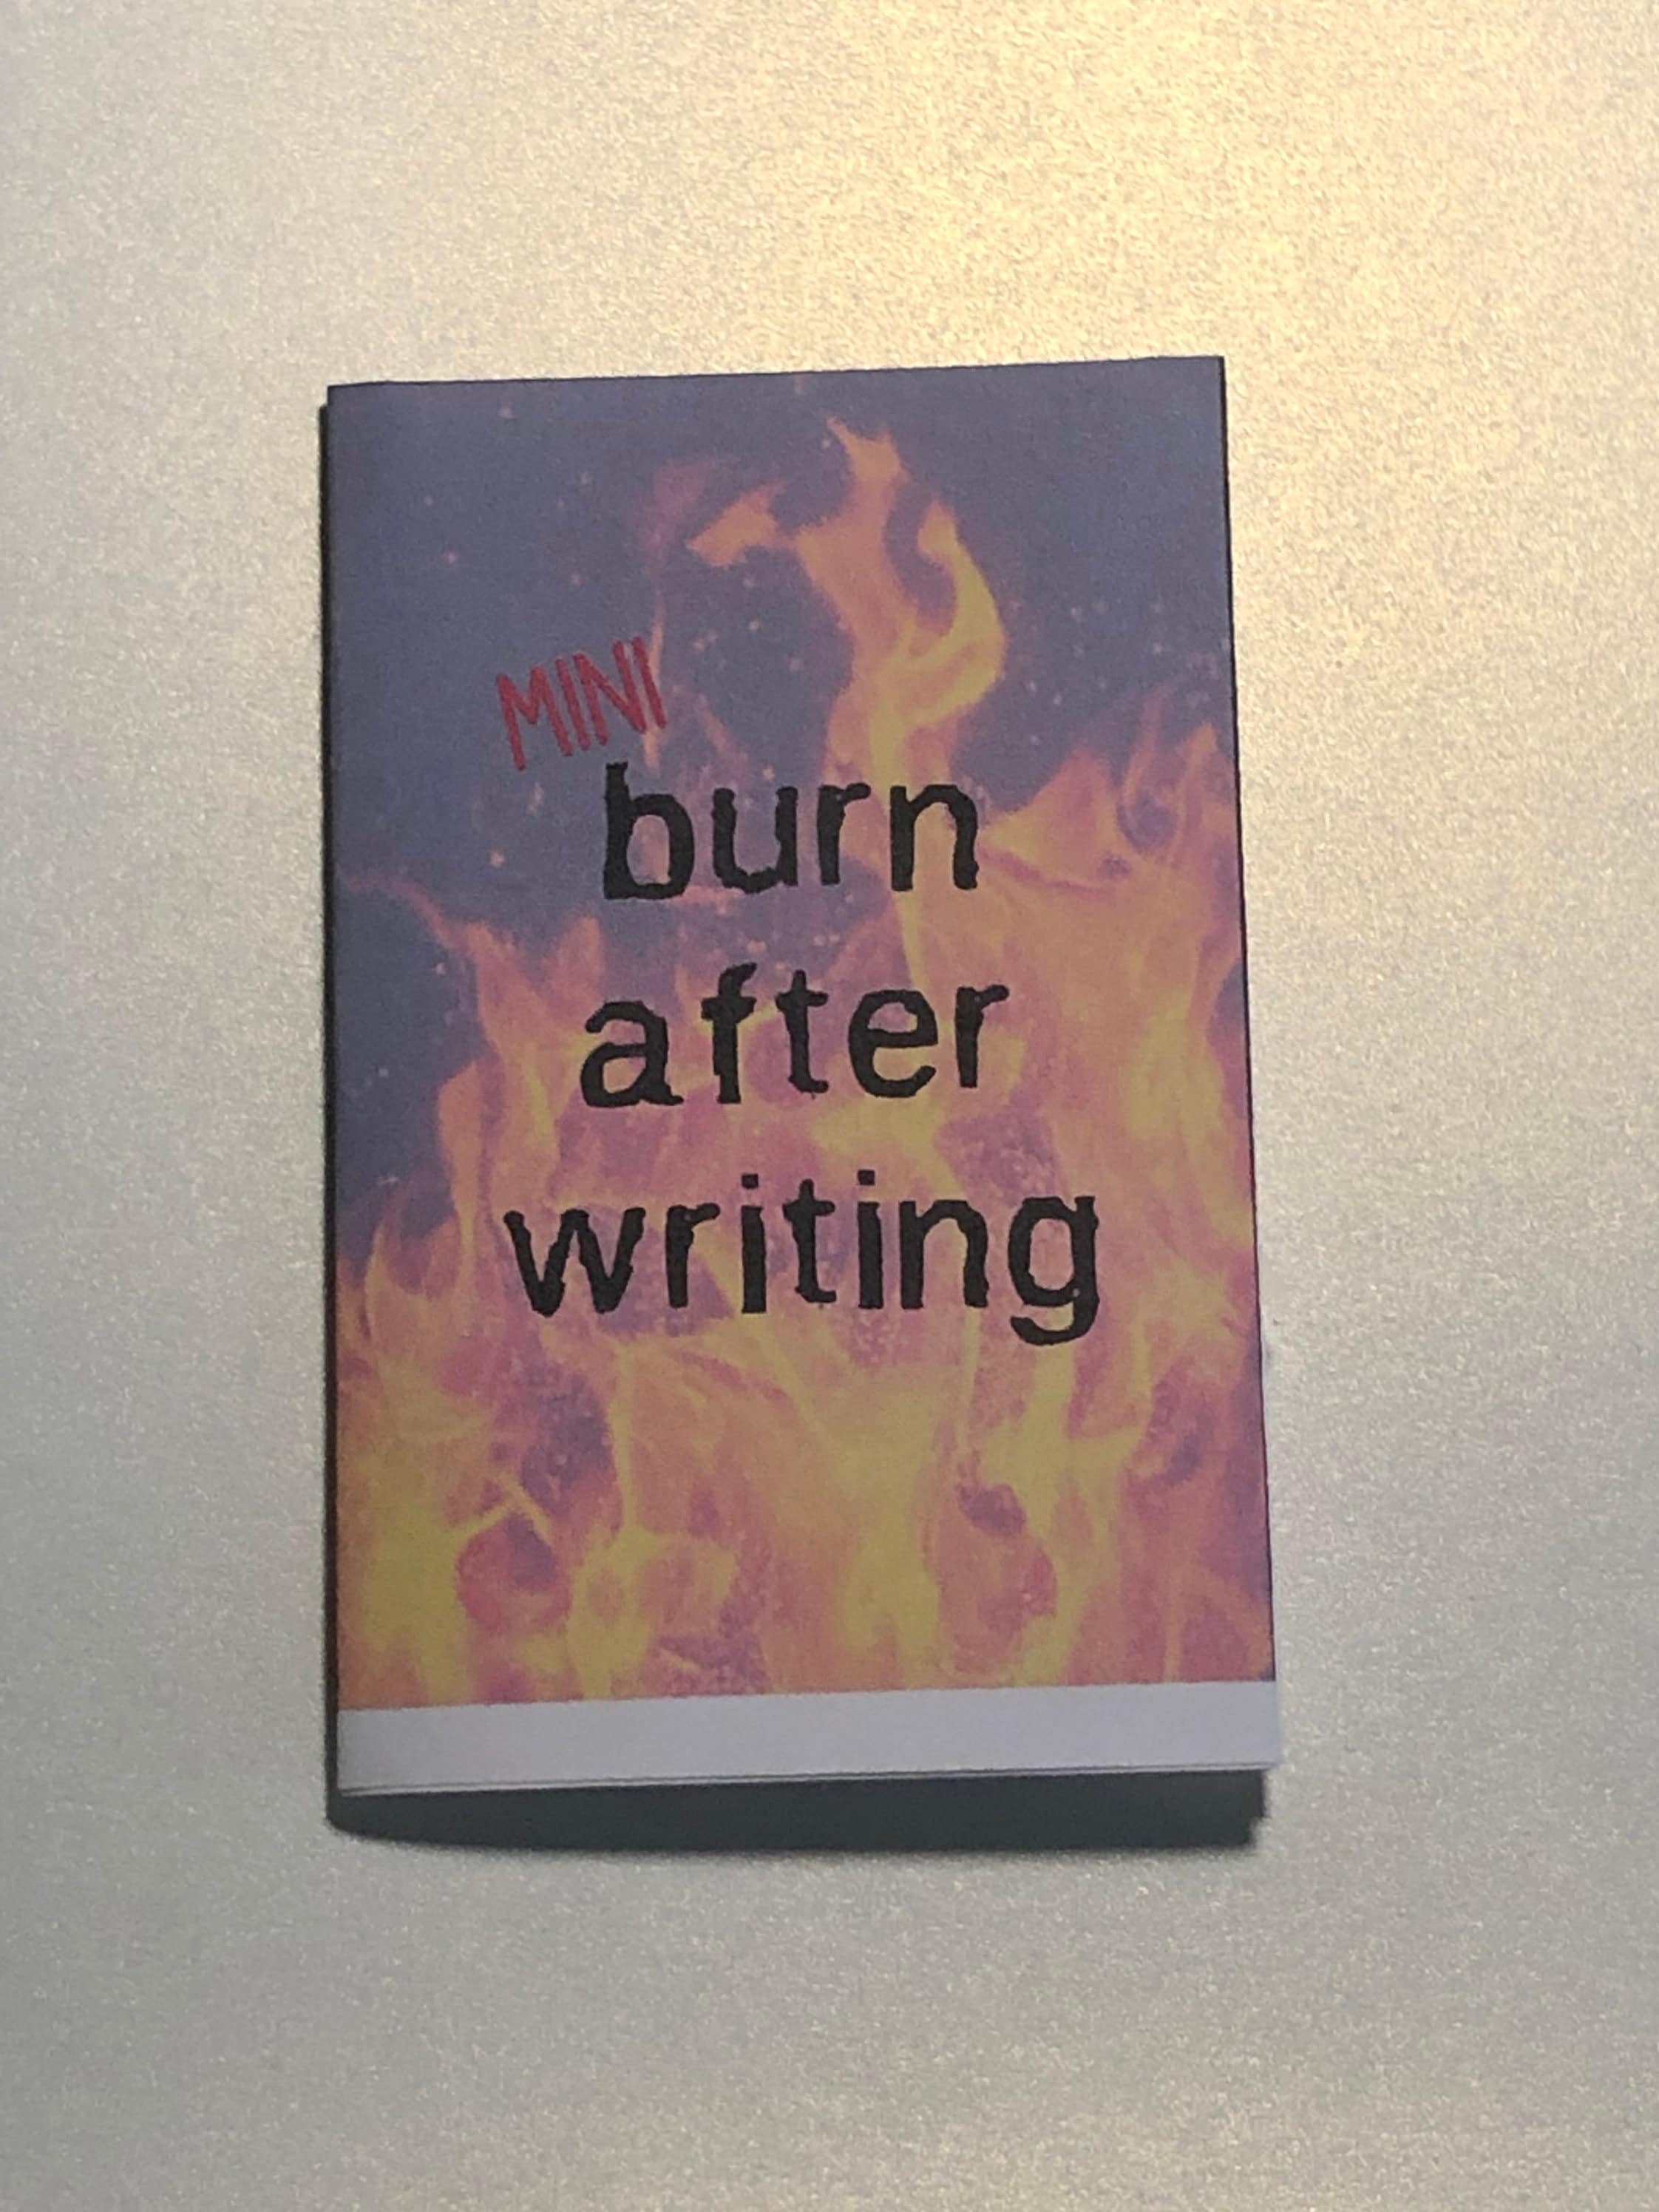 burn after writing book prompts